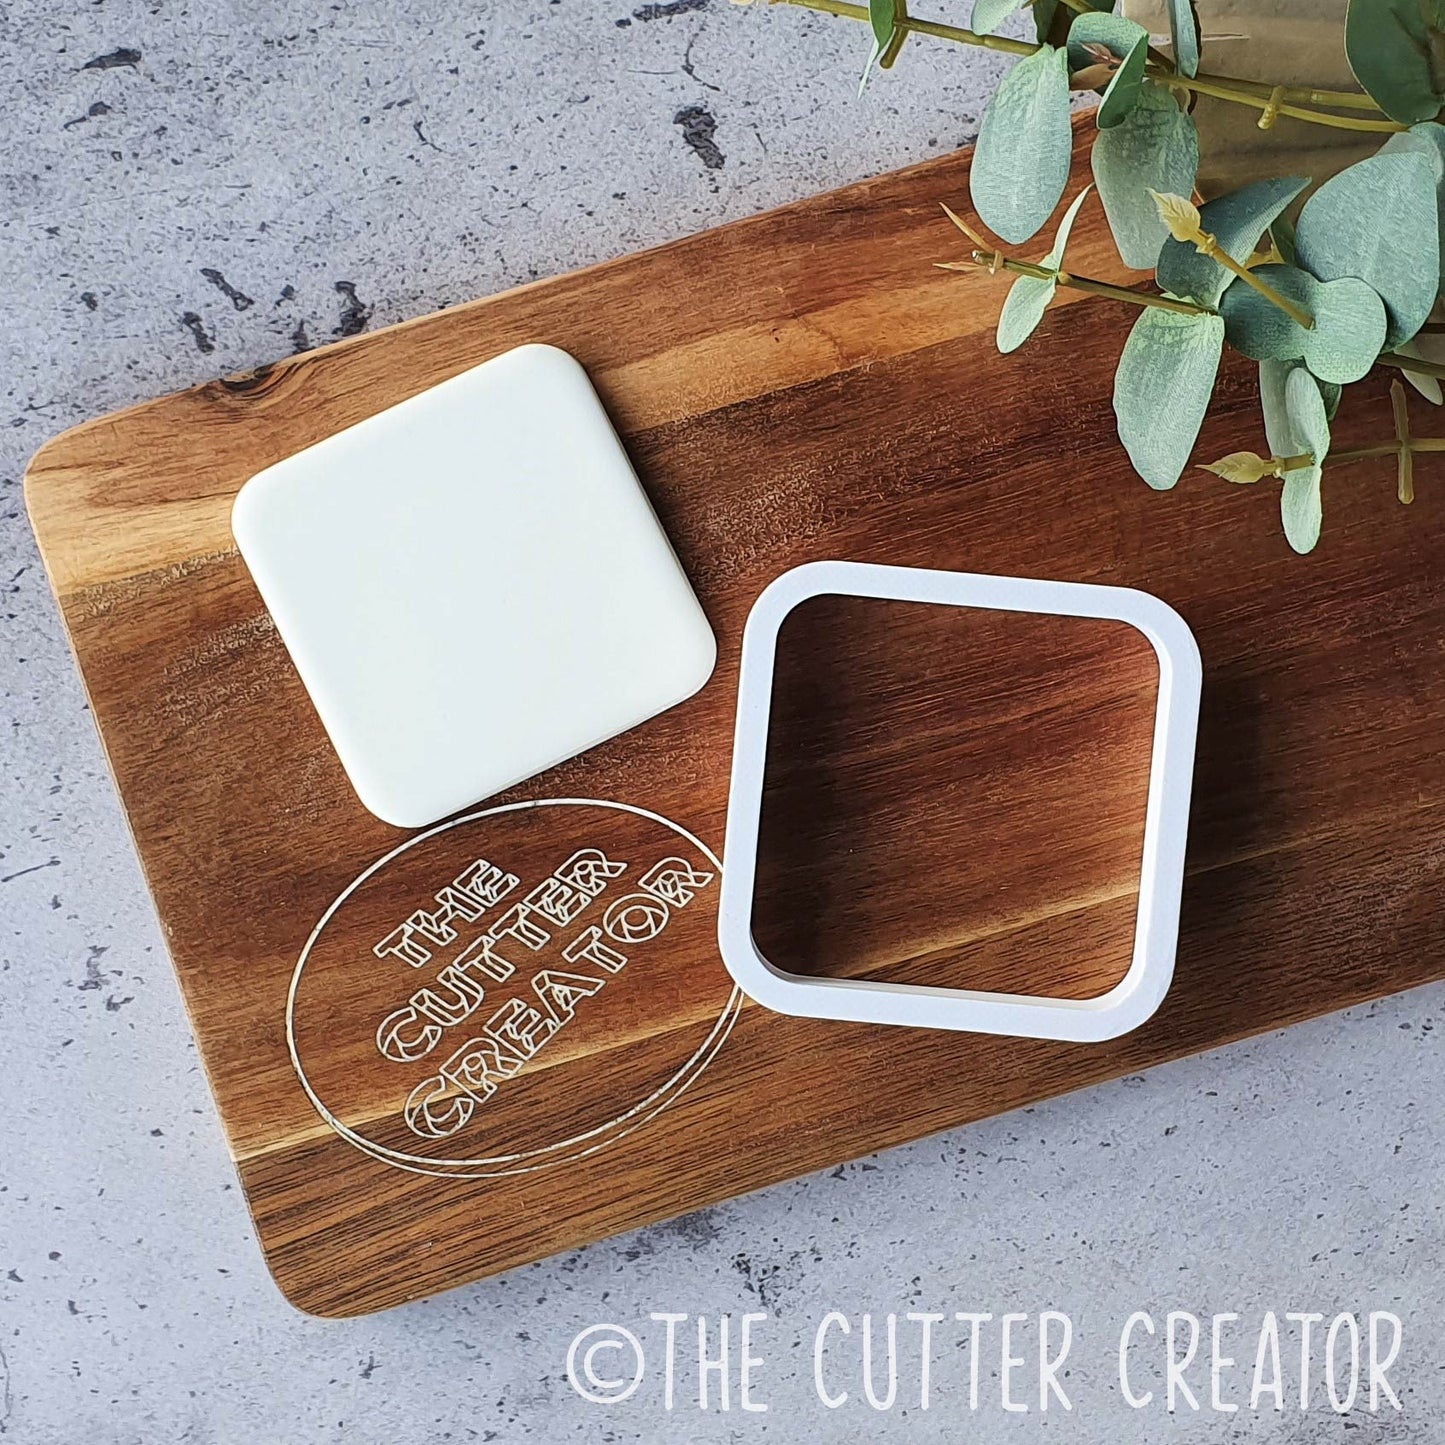 Rounded Square Cutter